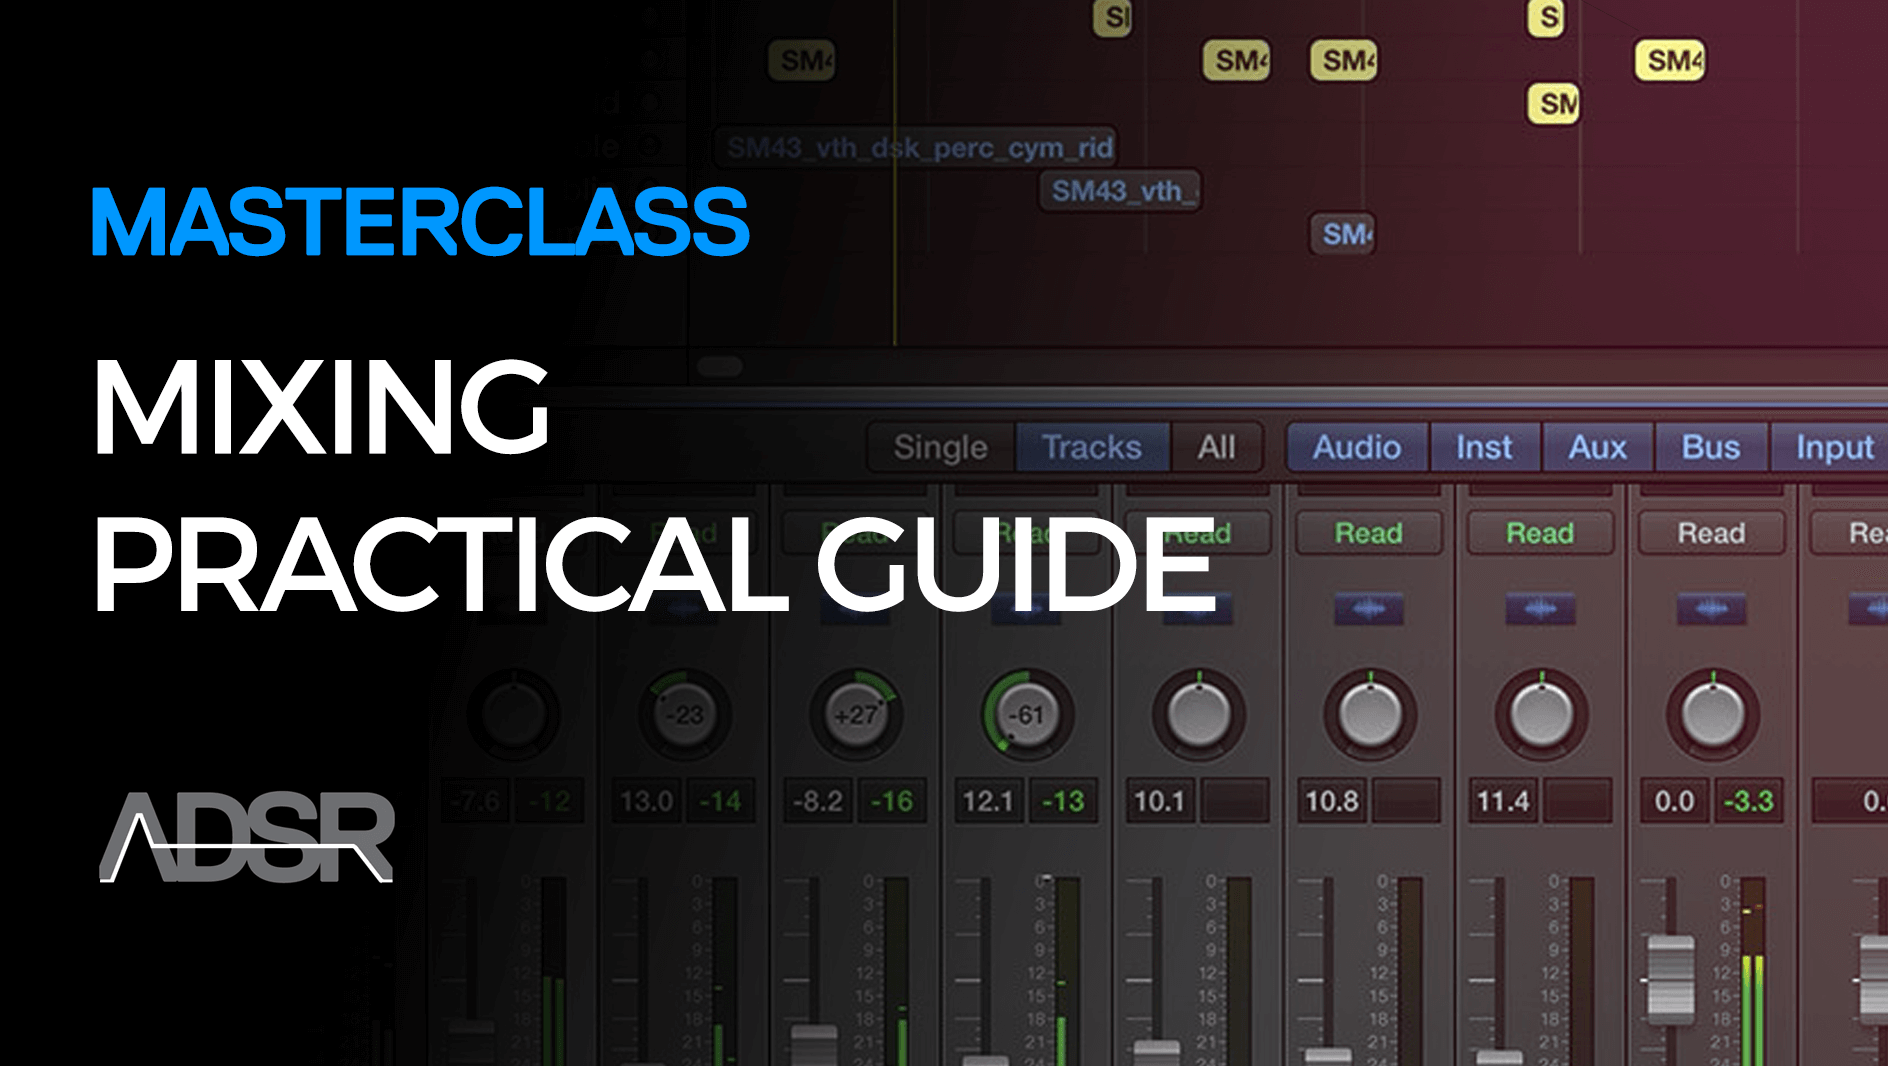 How To Mix Electronic Dance Music - A Practical Guide